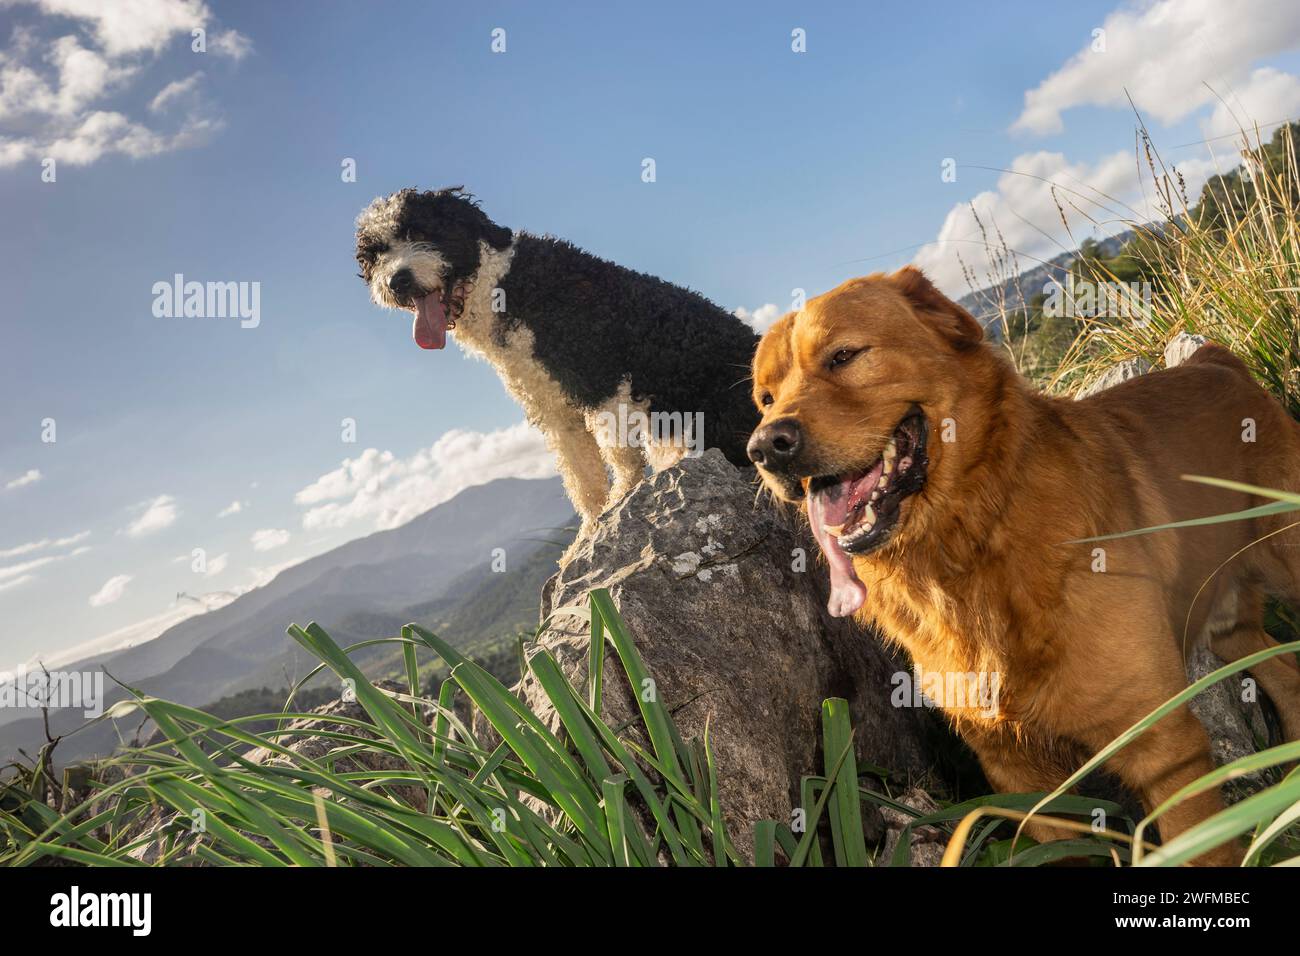 Perched on a mountain boulder, two dogs, one with a shaggy coat and the other golden-furred, pant happily after a hike. They survey the landscape, gua Stock Photo